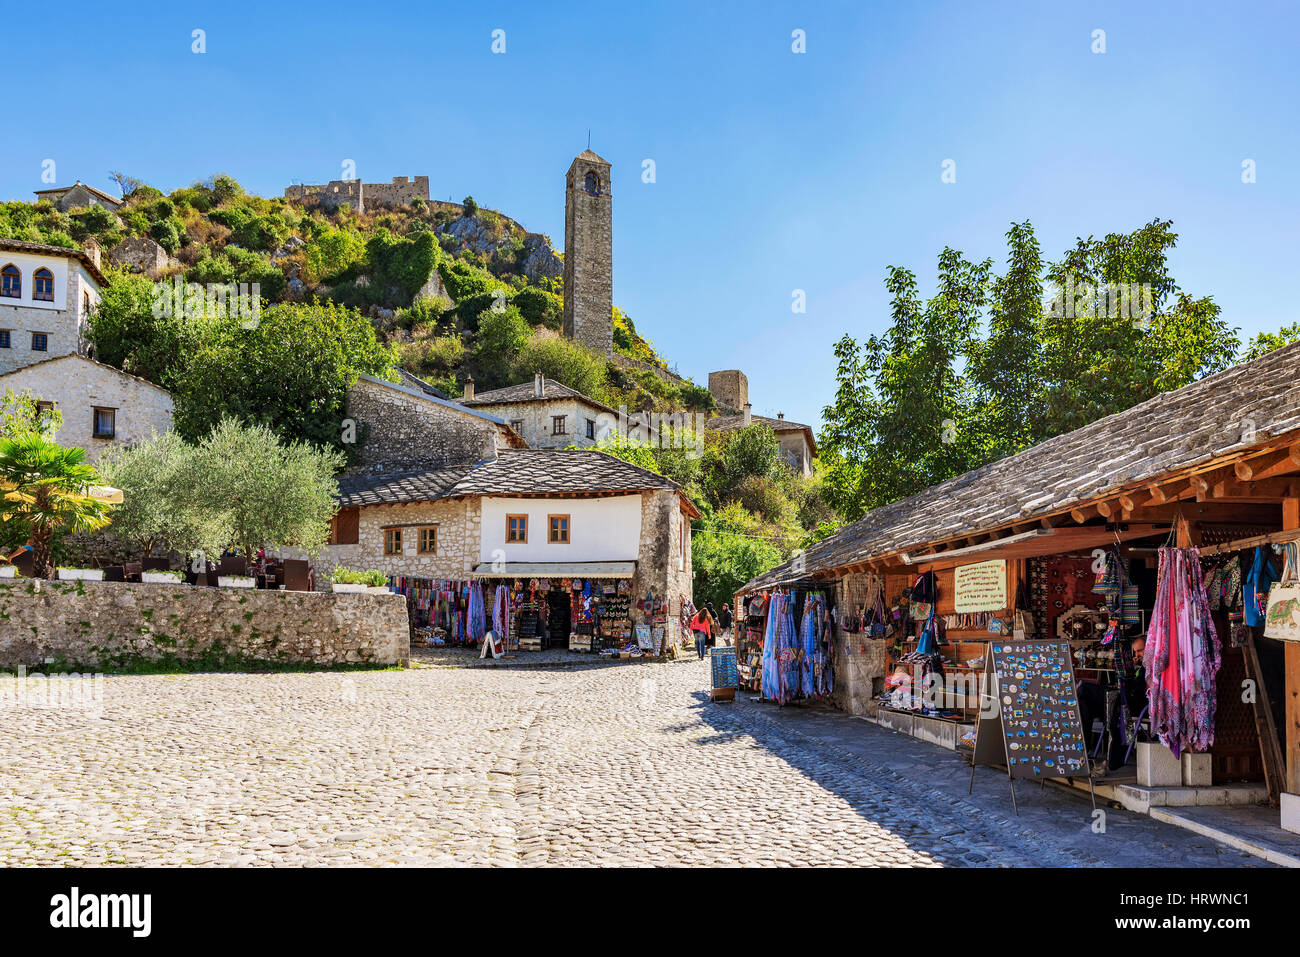 POCITELJ, BOSNIA AND HERZEGOVINA - SEPTEMBER 23: This is the old town architecture of an ancient Ottoman fortress town called Pocitelj on September 23 Stock Photo